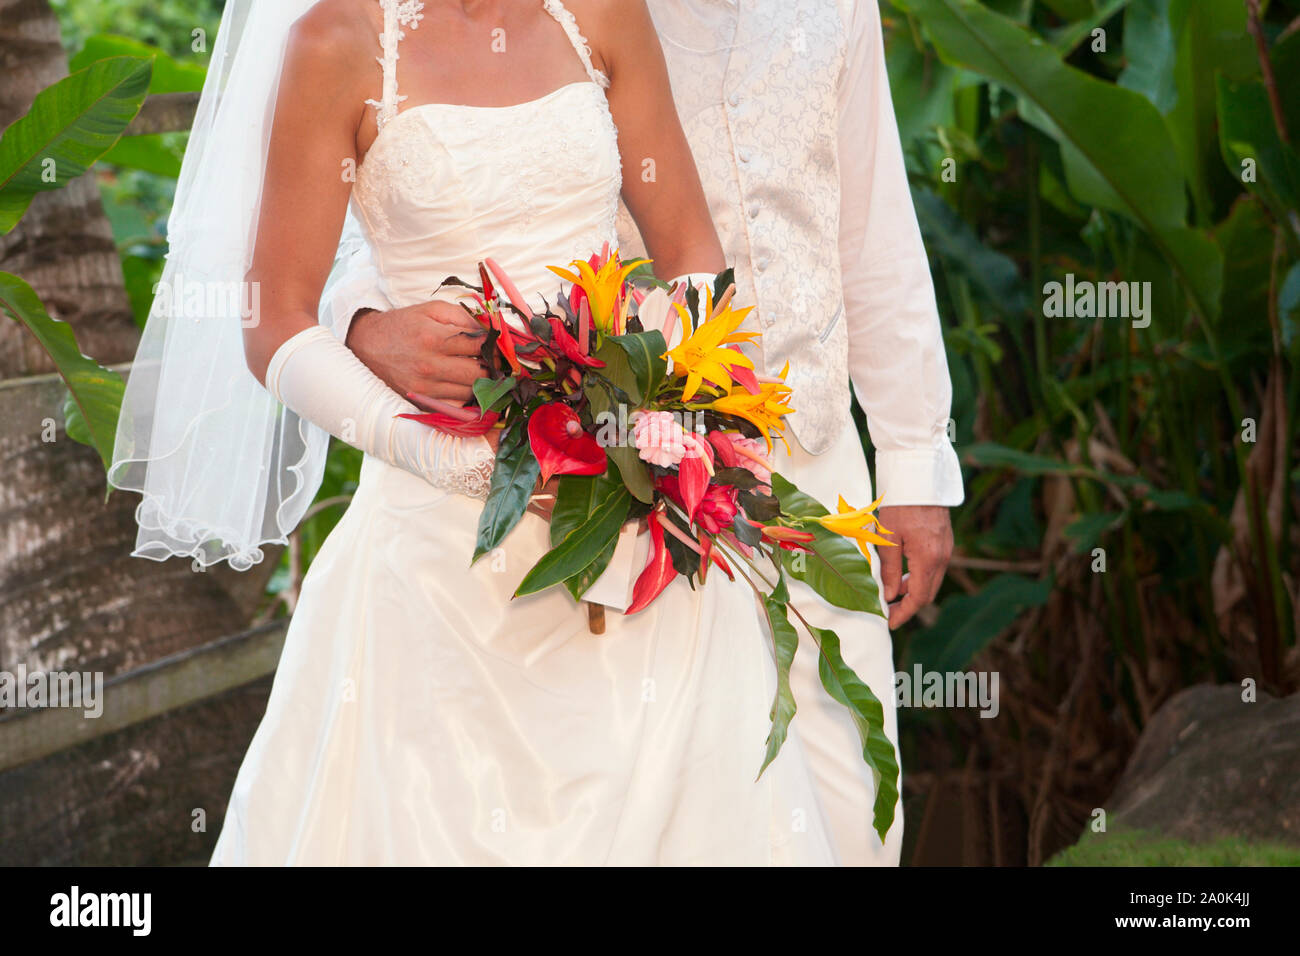 Partial view of a French couple wearing traditional white formal wedding attire holding native flowers during their wedding service outdoors in Domini Stock Photo